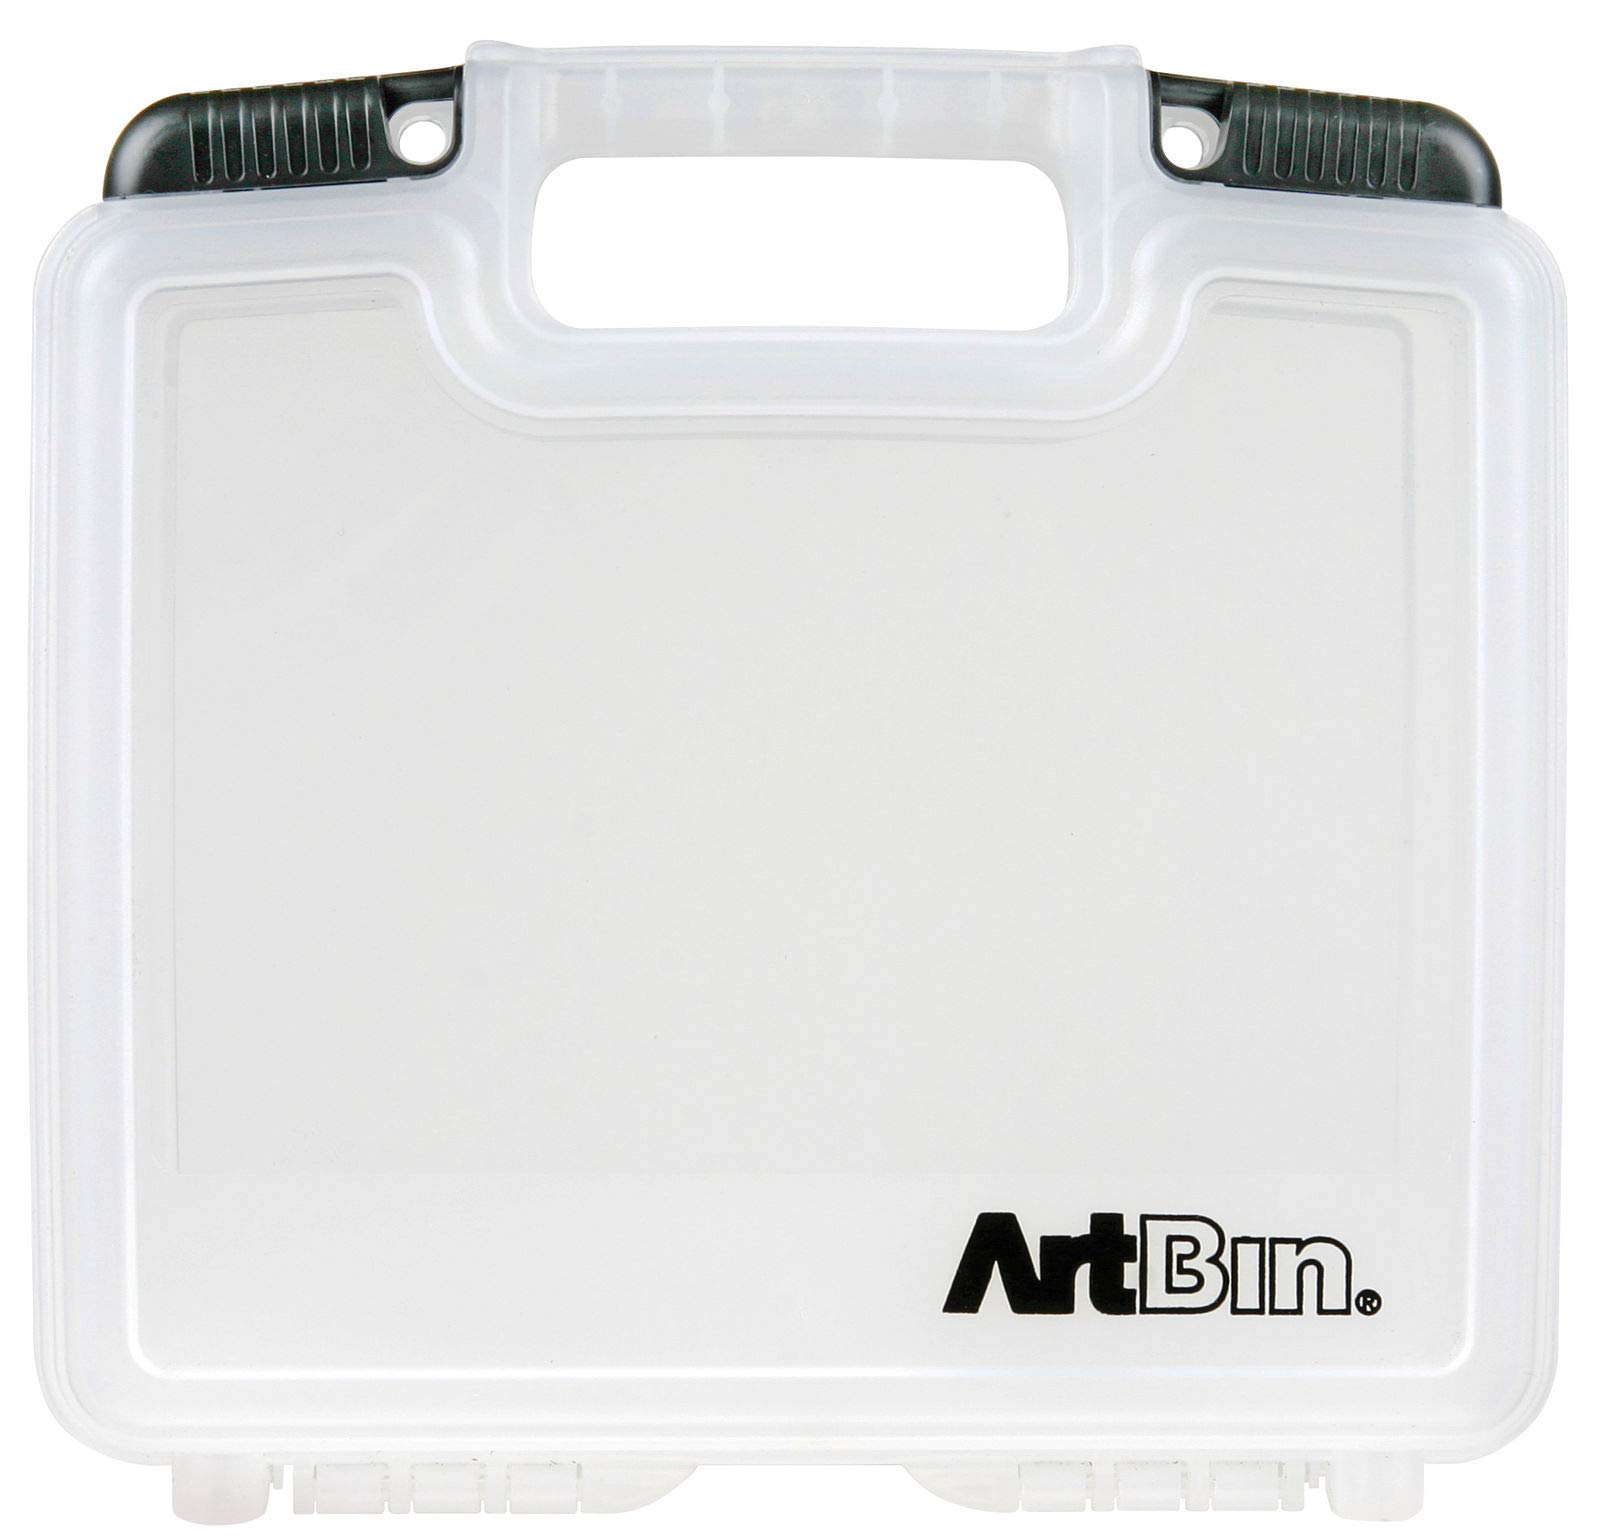 ArtBin 6972AB 10 inch Quick View Deep Base Carrying Case, Portable Art & Craft Organizer with Handle, [1] Plastic Storage Case, Translucent